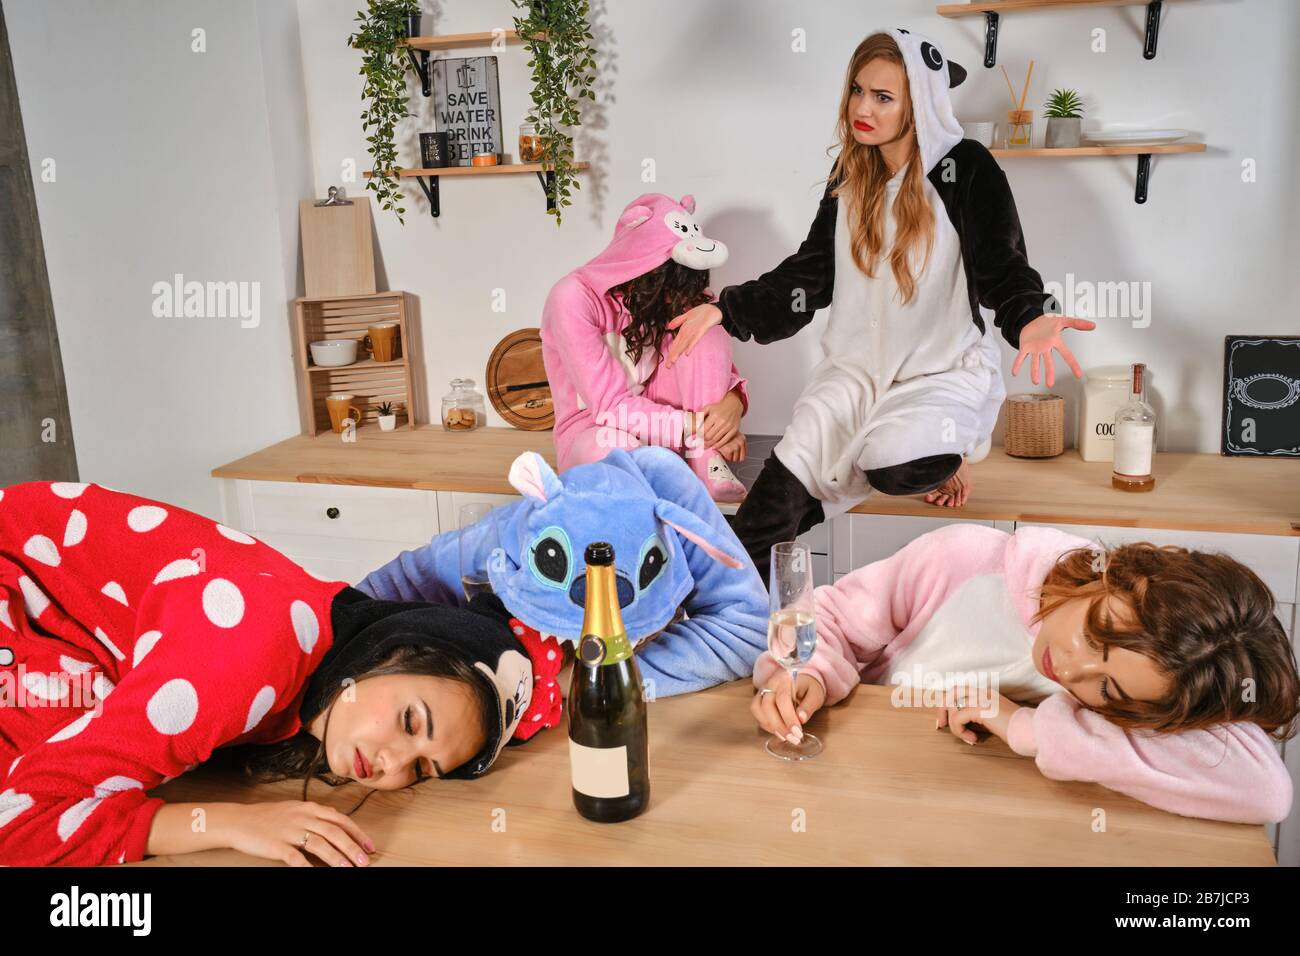 Girls dressed in plush pajamas in form of cartoons characters enjoying hen-party. Some of them got drunk, fell asleep on kitchen worktops. Close-up Stock Photo